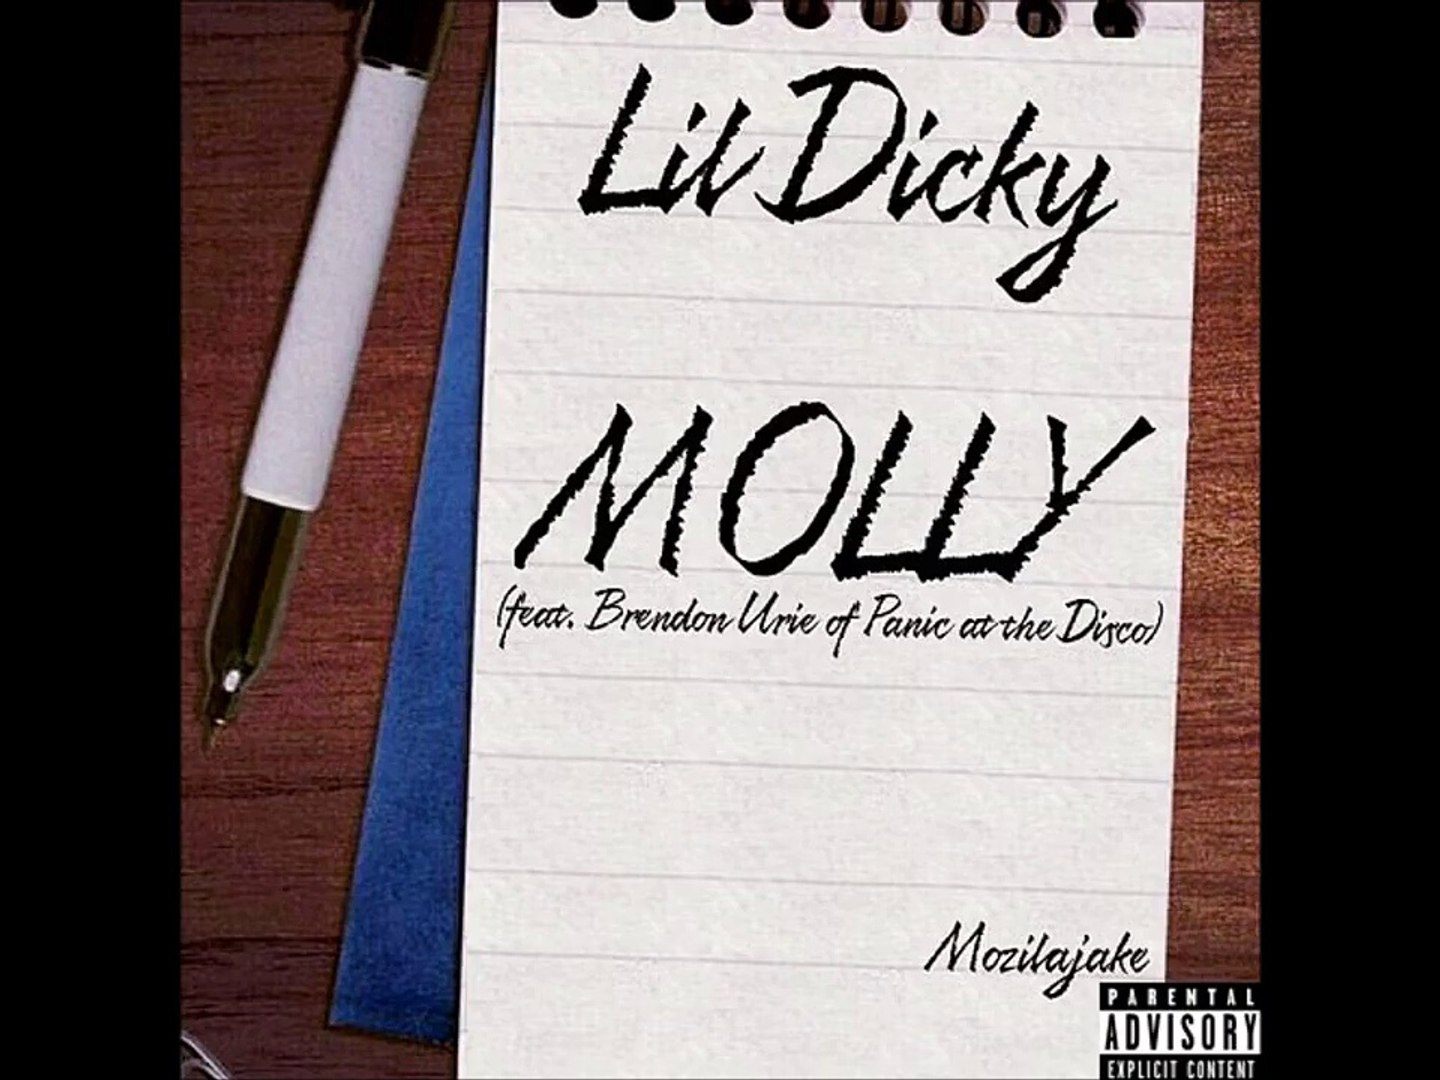 Dicky - Molly (feat. Brendon Urie of Panic at the Disco) [Mozilajake Artwork] - video Dailymotion